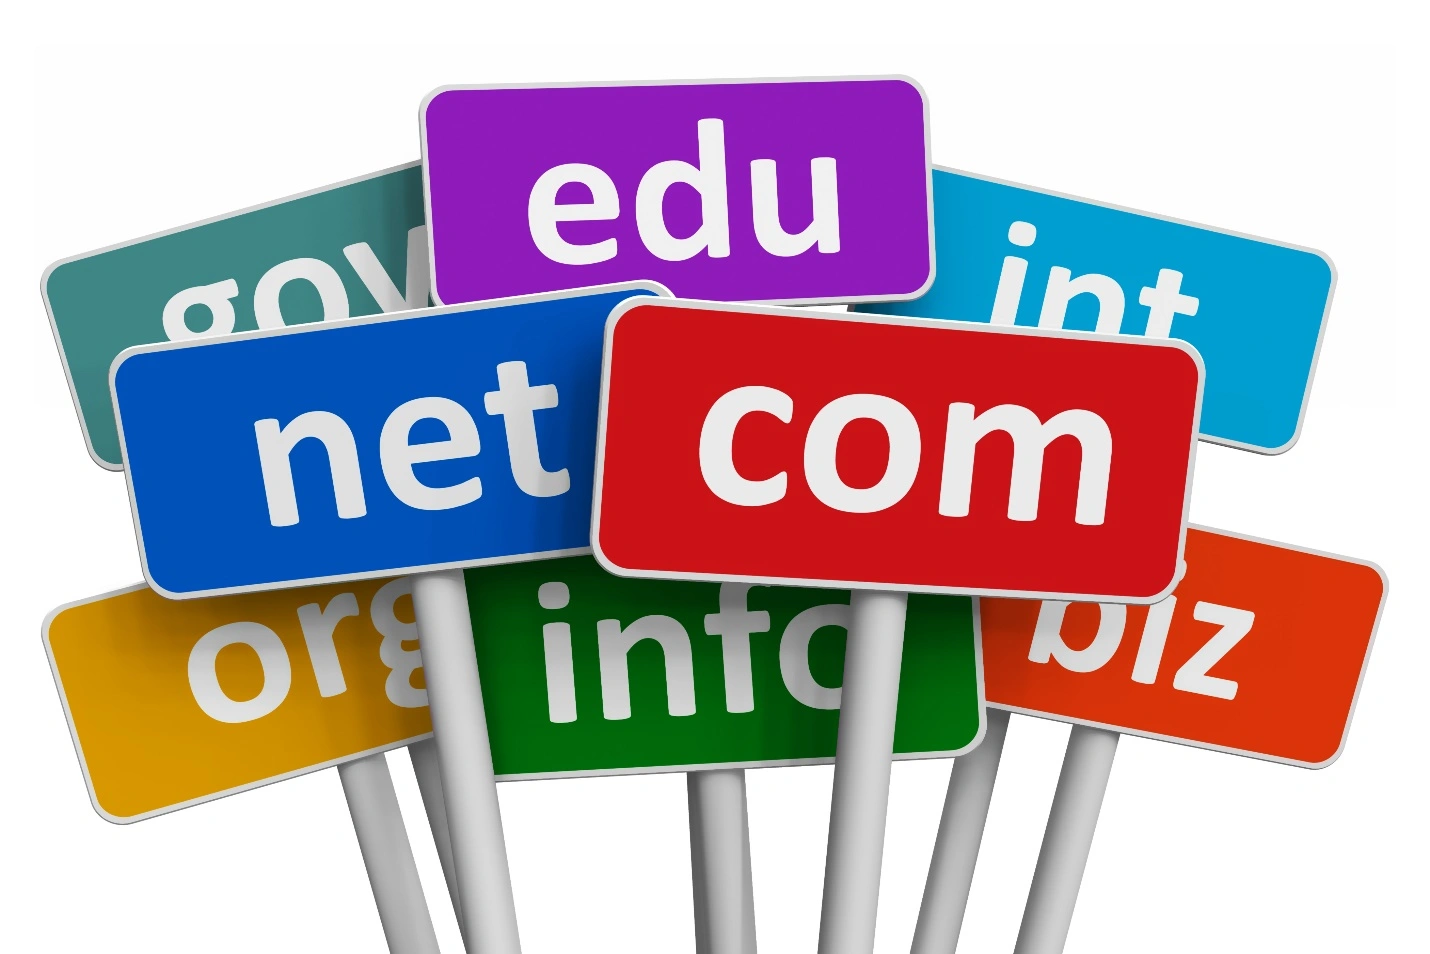 Country Code Top Level Domain - ccTLD